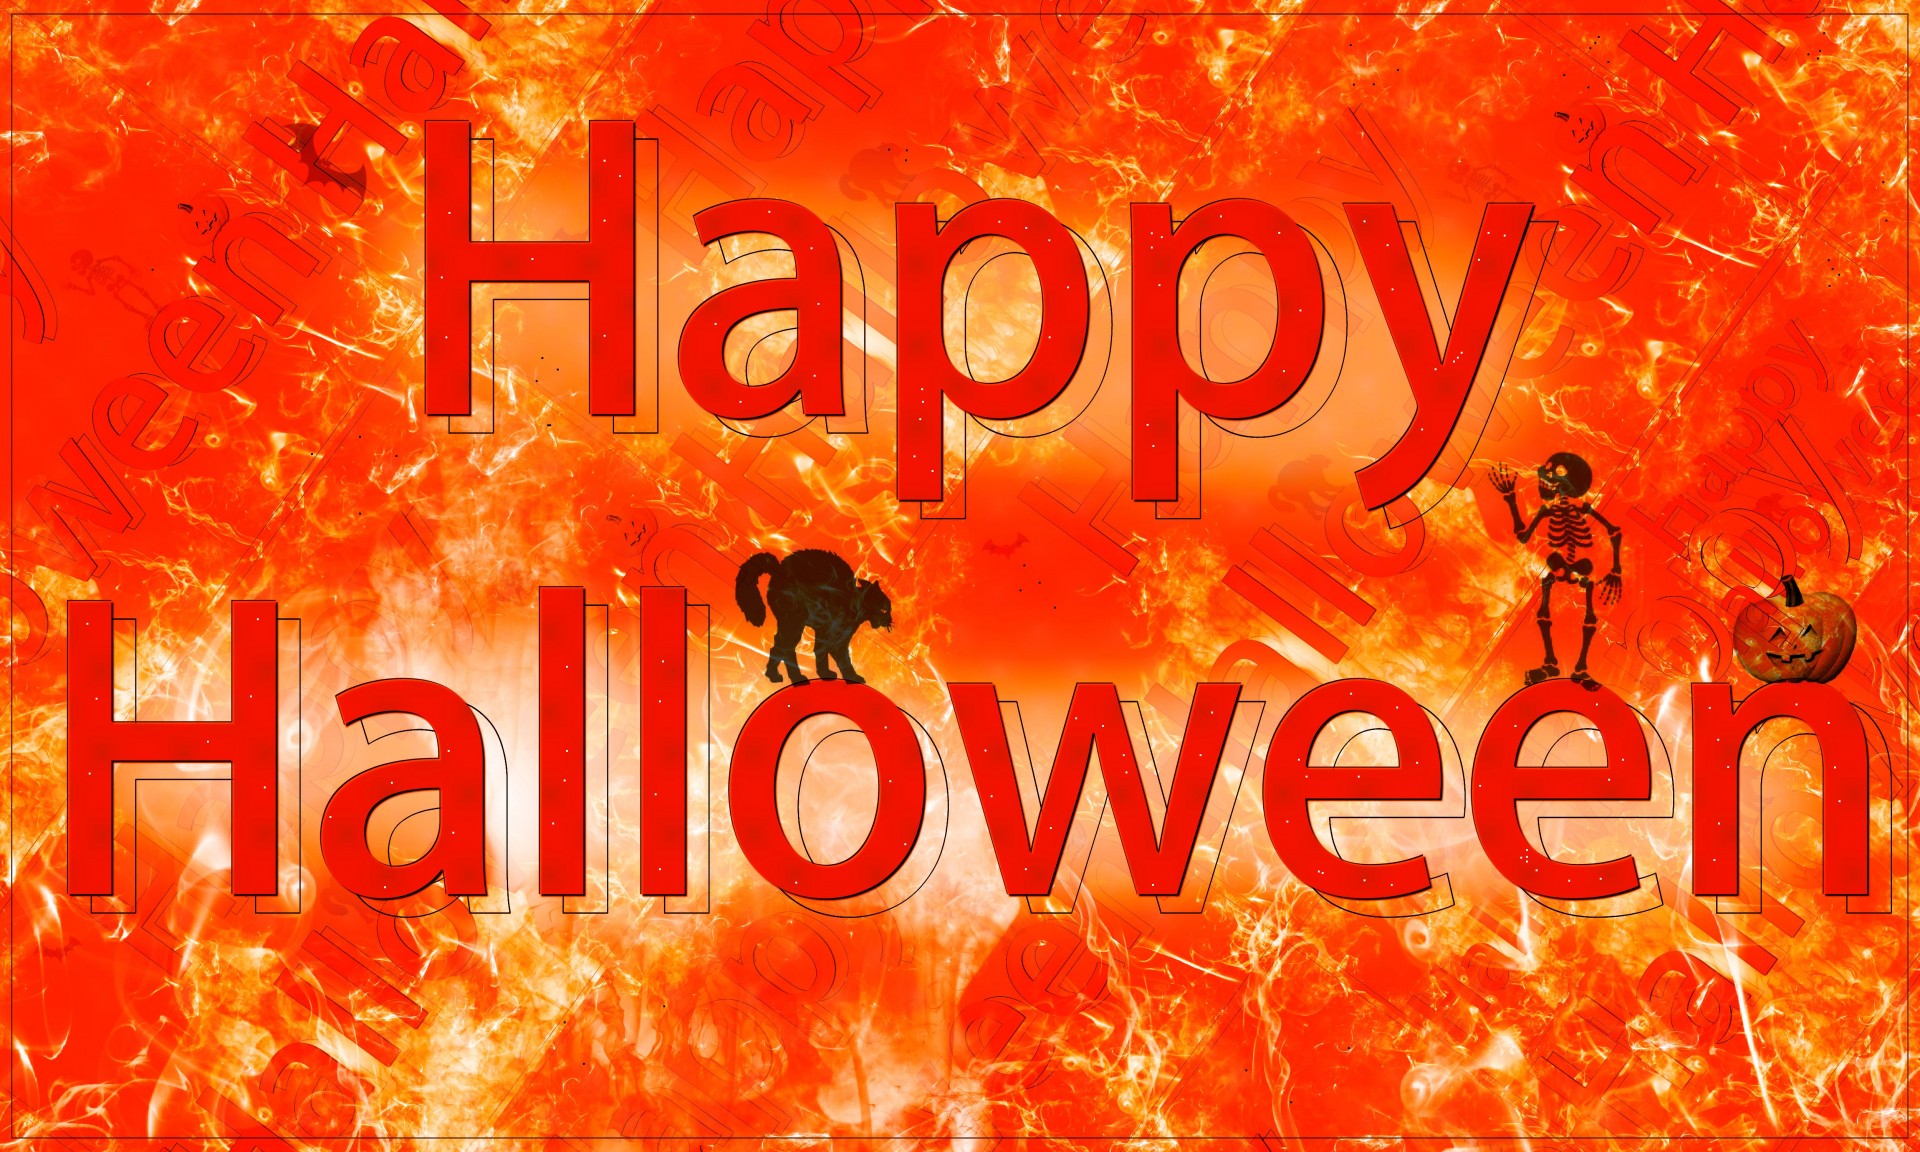 happy halloween text paint brushes free photo